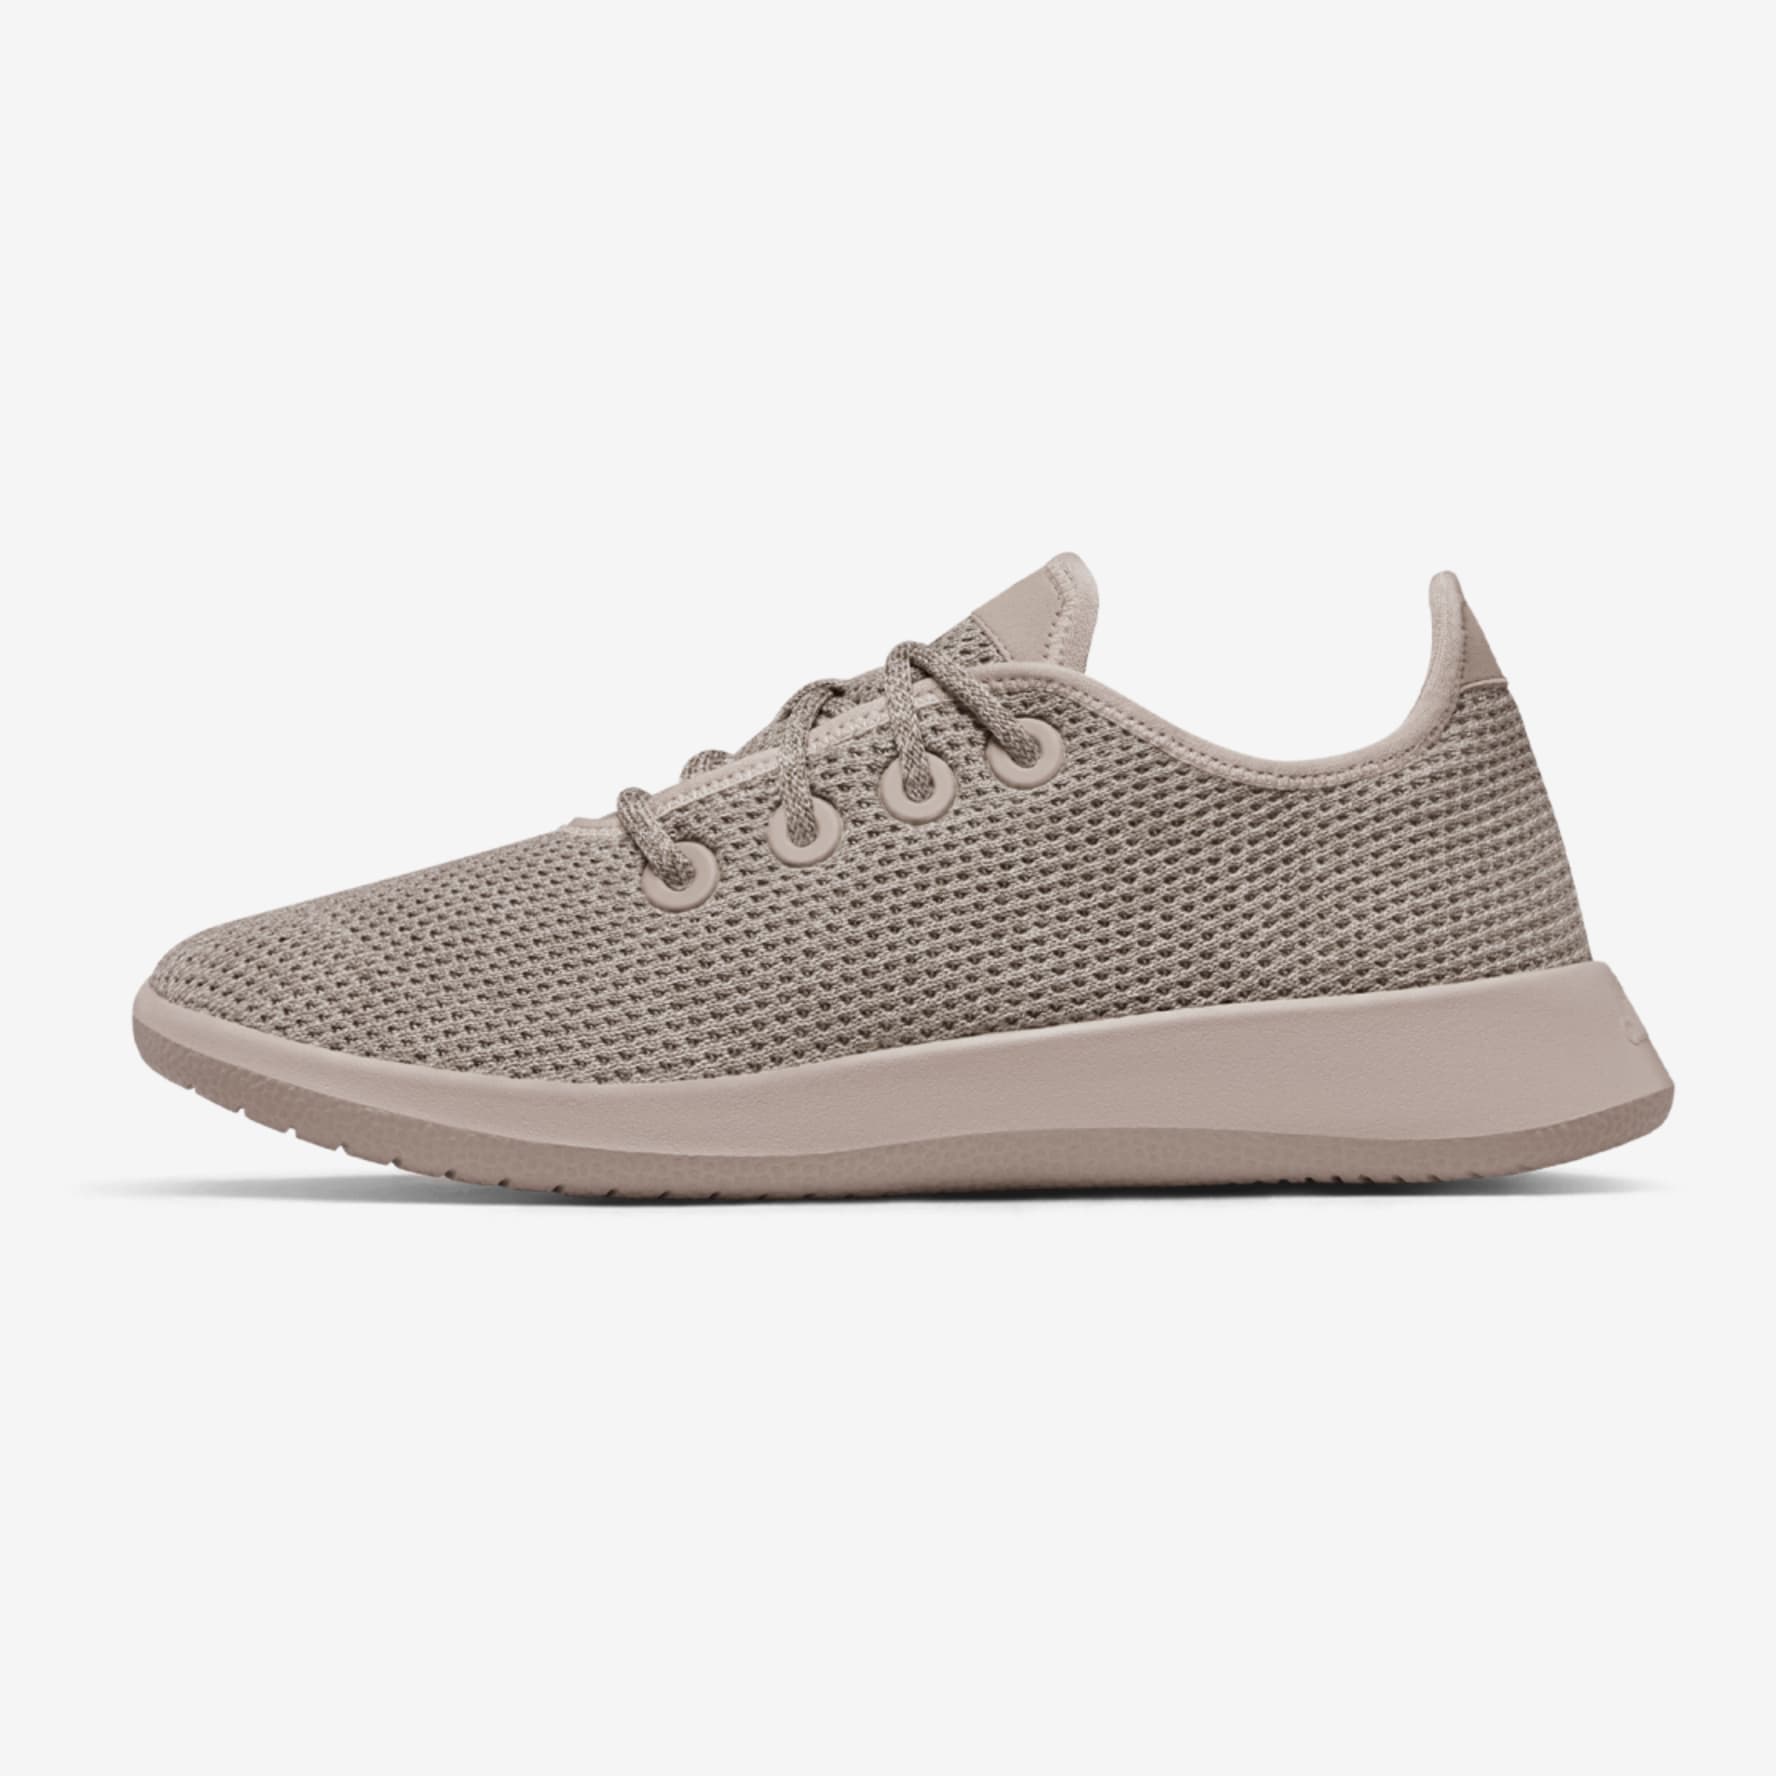 Men's Tree Runners - Bough (Taupe Sole)